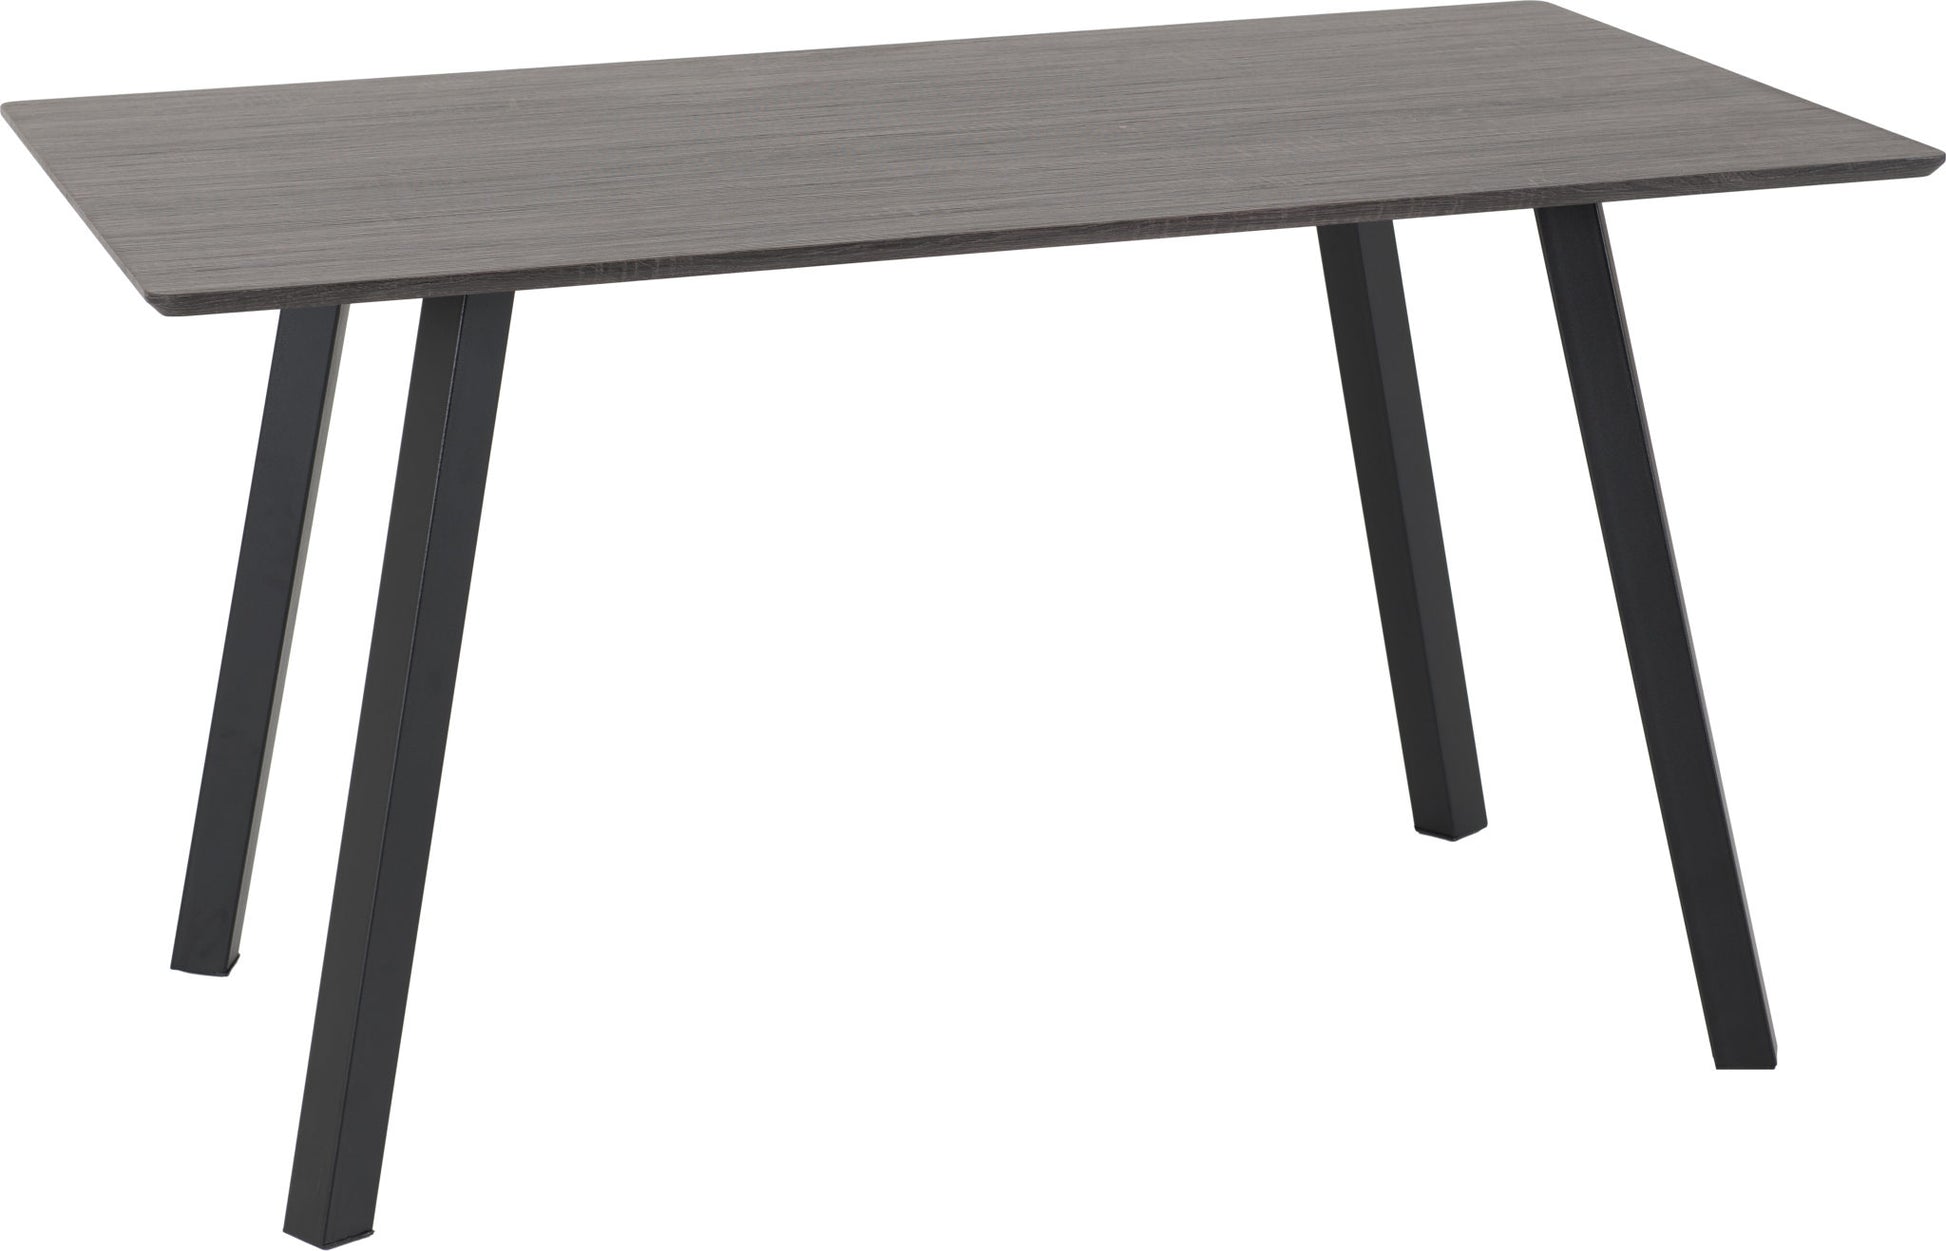 Berlin Dining Table Black Wood Grain- The Right Buy Store